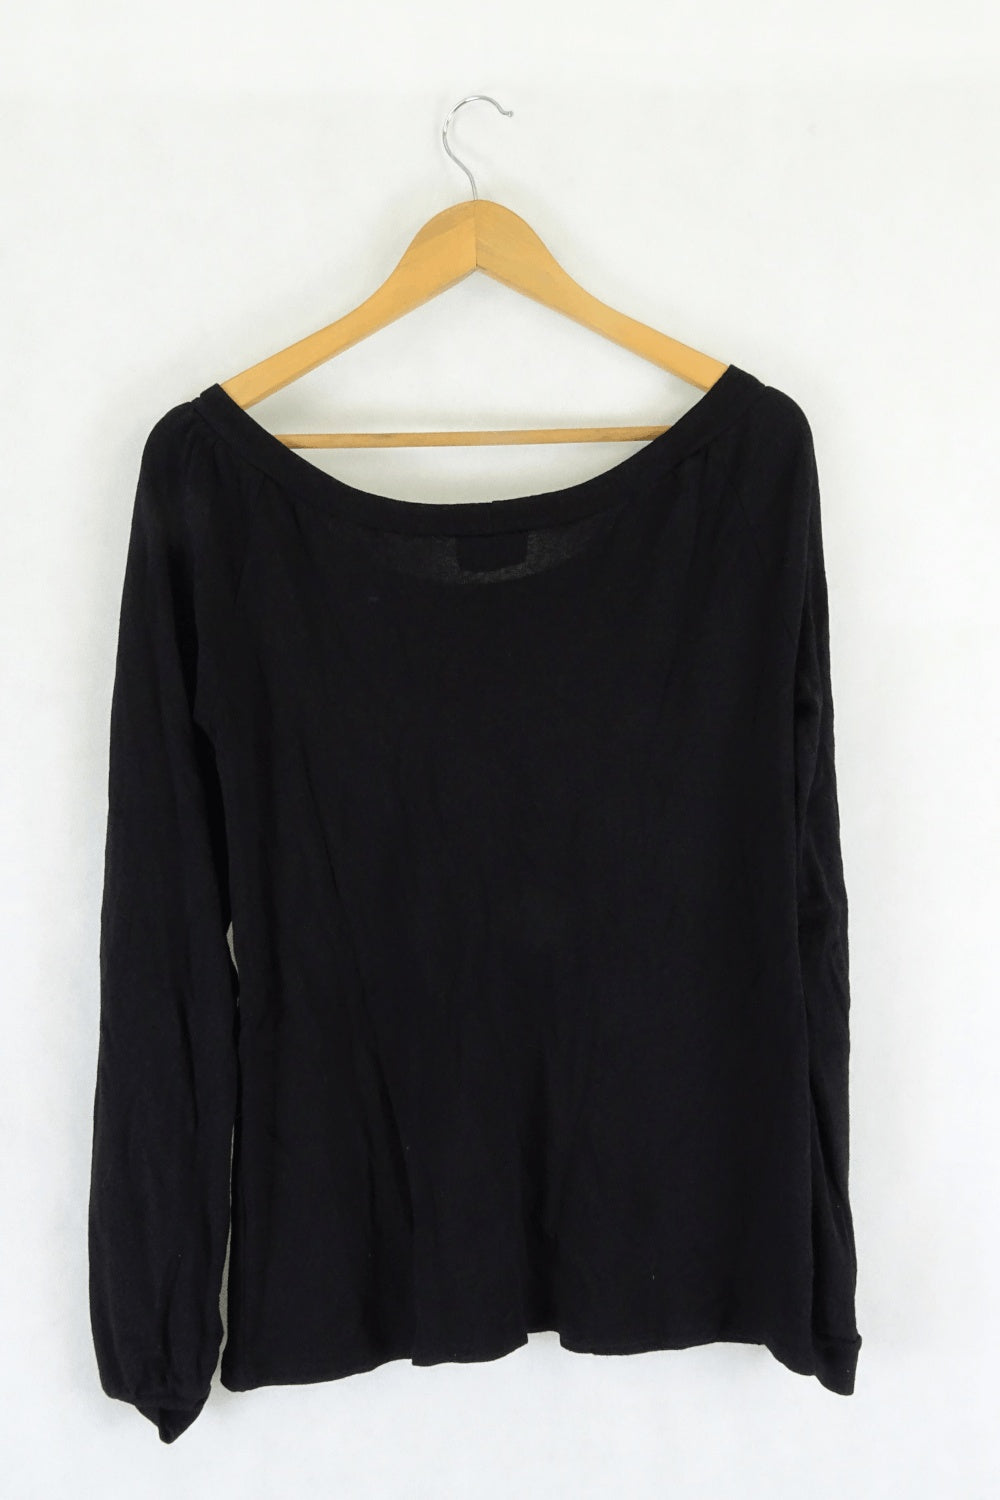 Michael Stans Long Sleeve BLack Top One Size Fit All